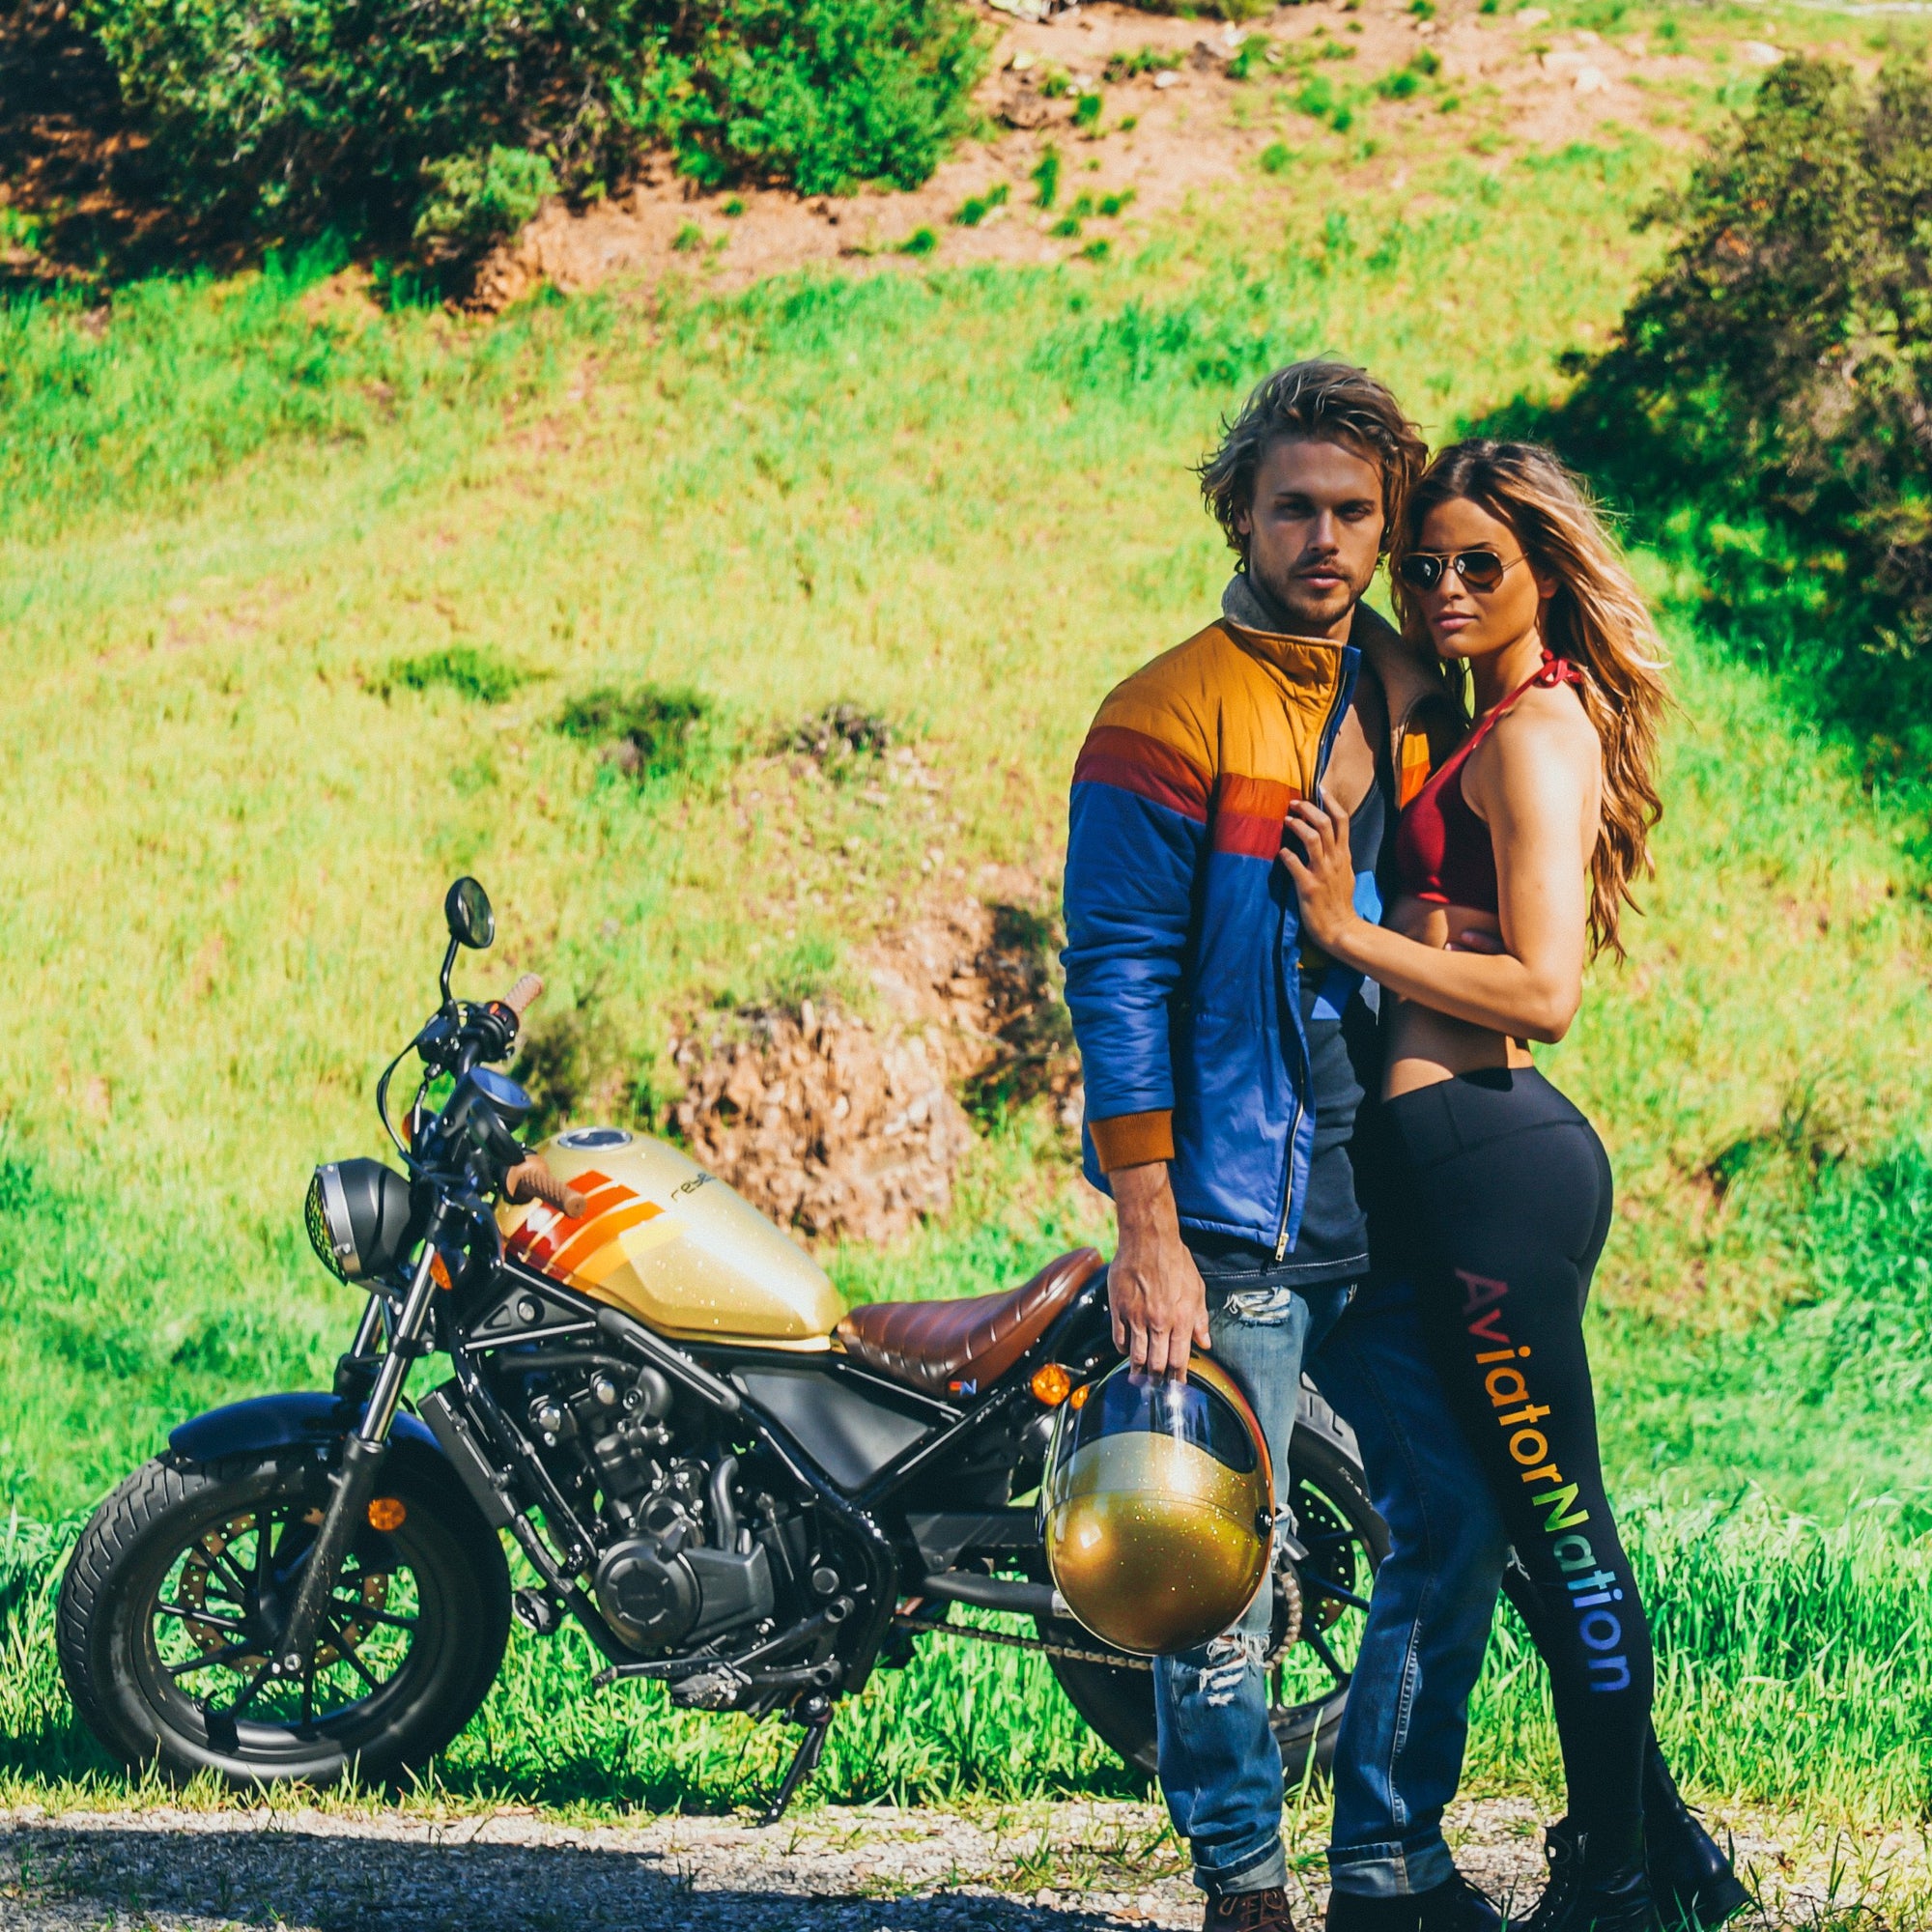 Two models posing in front of a motorcycle